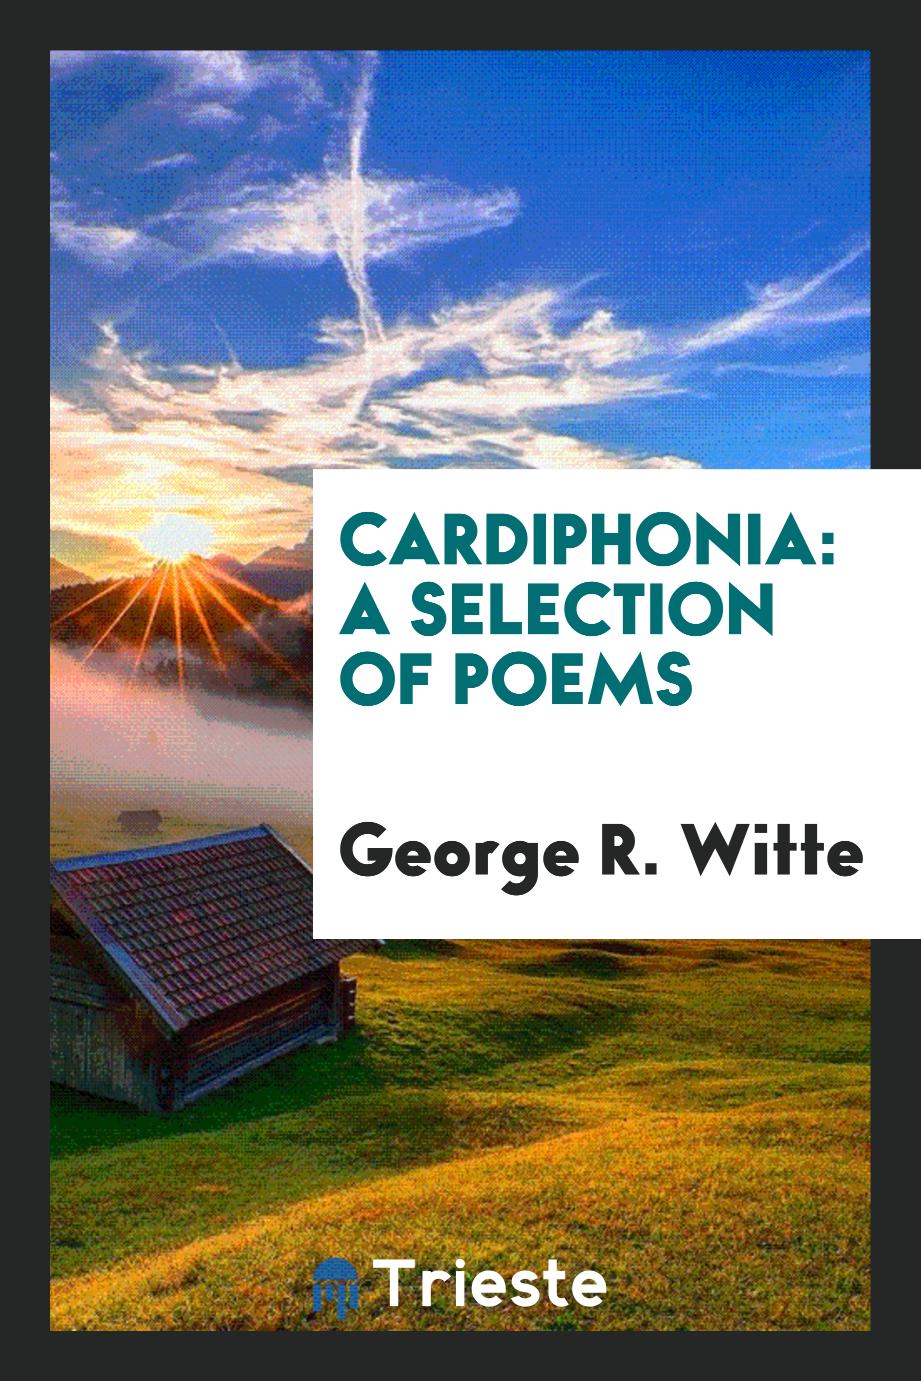 Cardiphonia: A Selection of Poems